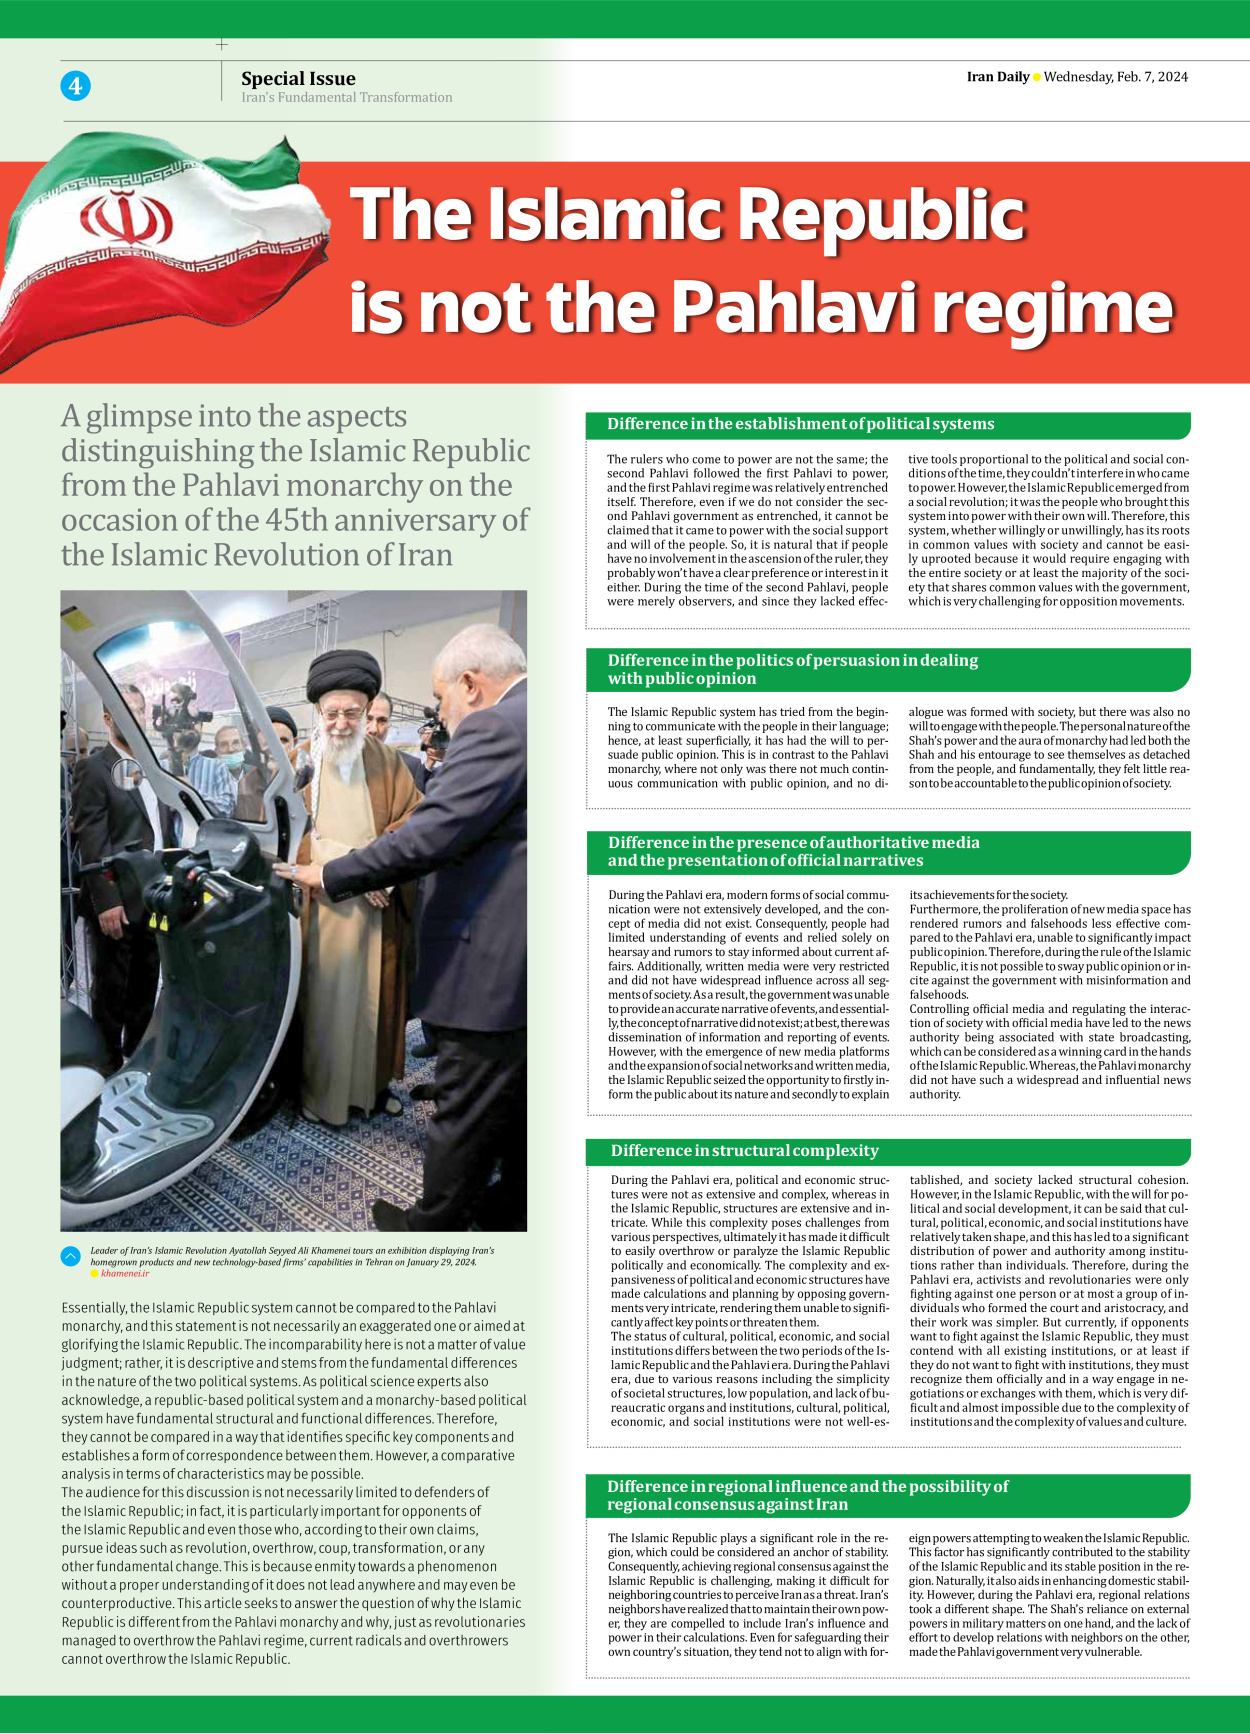 Iran Daily - Number Seven Thousand Five Hundred and Four - 07 February 2024 - Page 4